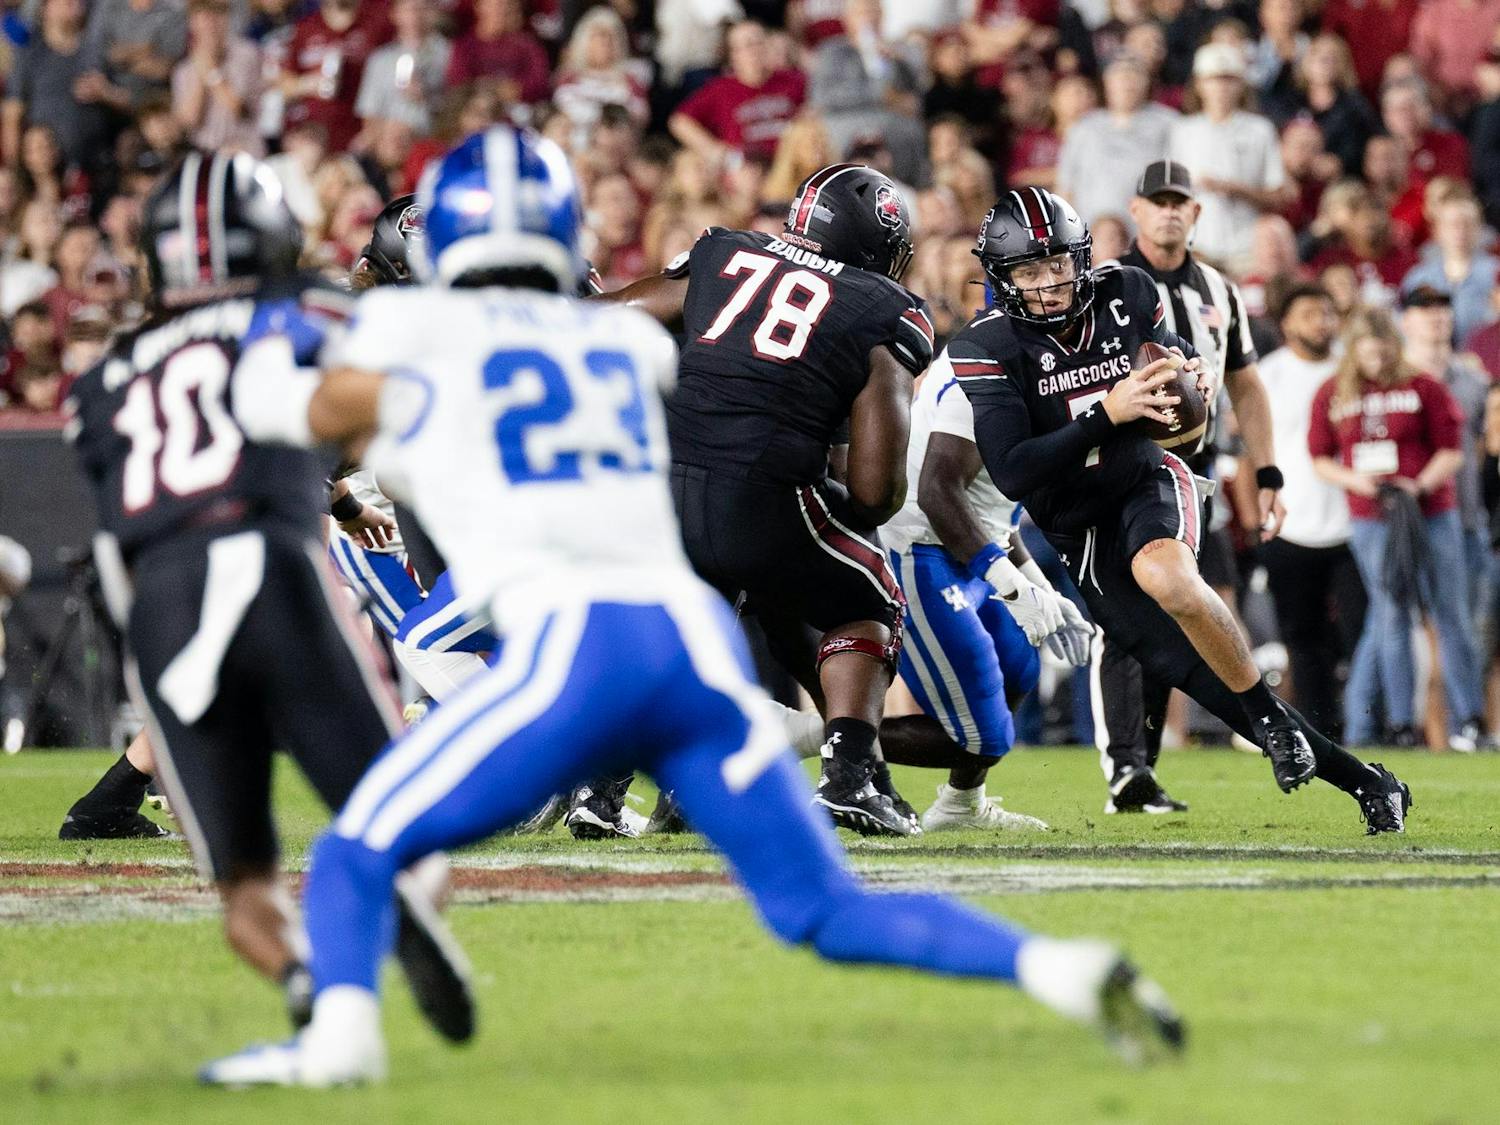 Redshirt senior quarterback Spencer Rattler weaves through offensive and defensive players during the game against Kentucky on Nov. 18, 2023. The Gamecocks defeated the Wildcats 17-14 and now only need to win one more game to be bowl eligible.